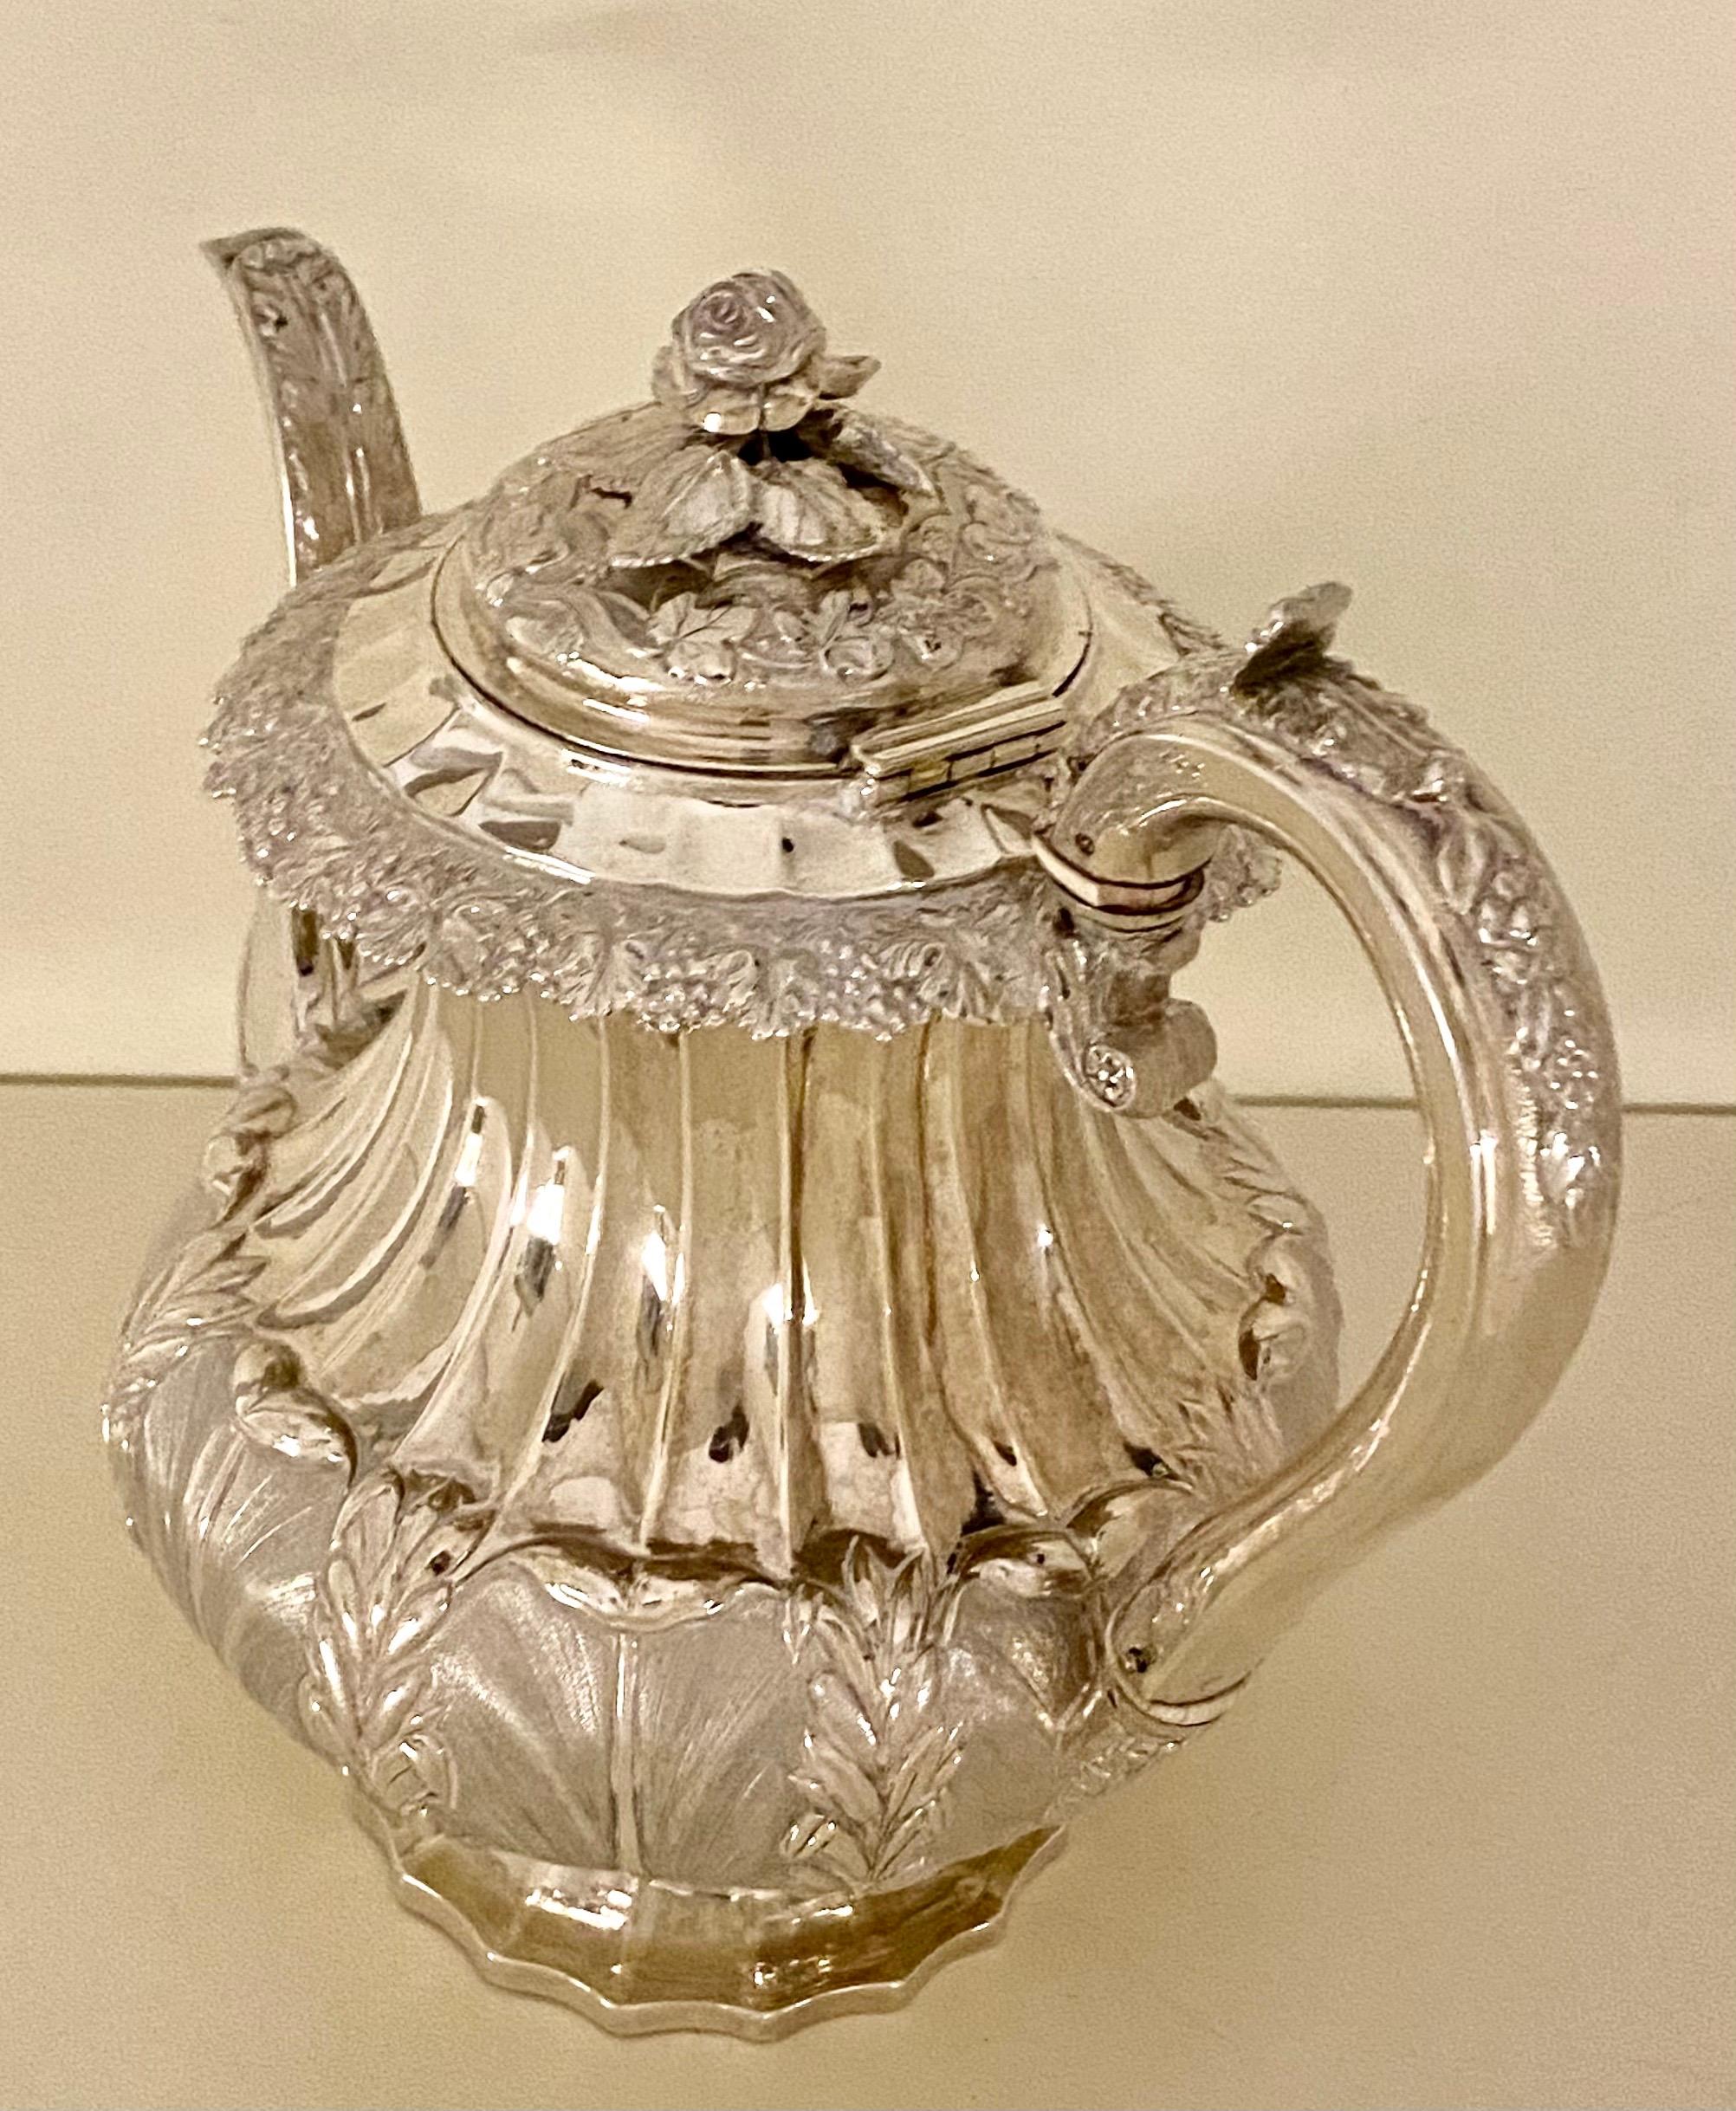 Mid-19th Century Antique William IV Sterling Silver Teapot Superb Decoration 1830